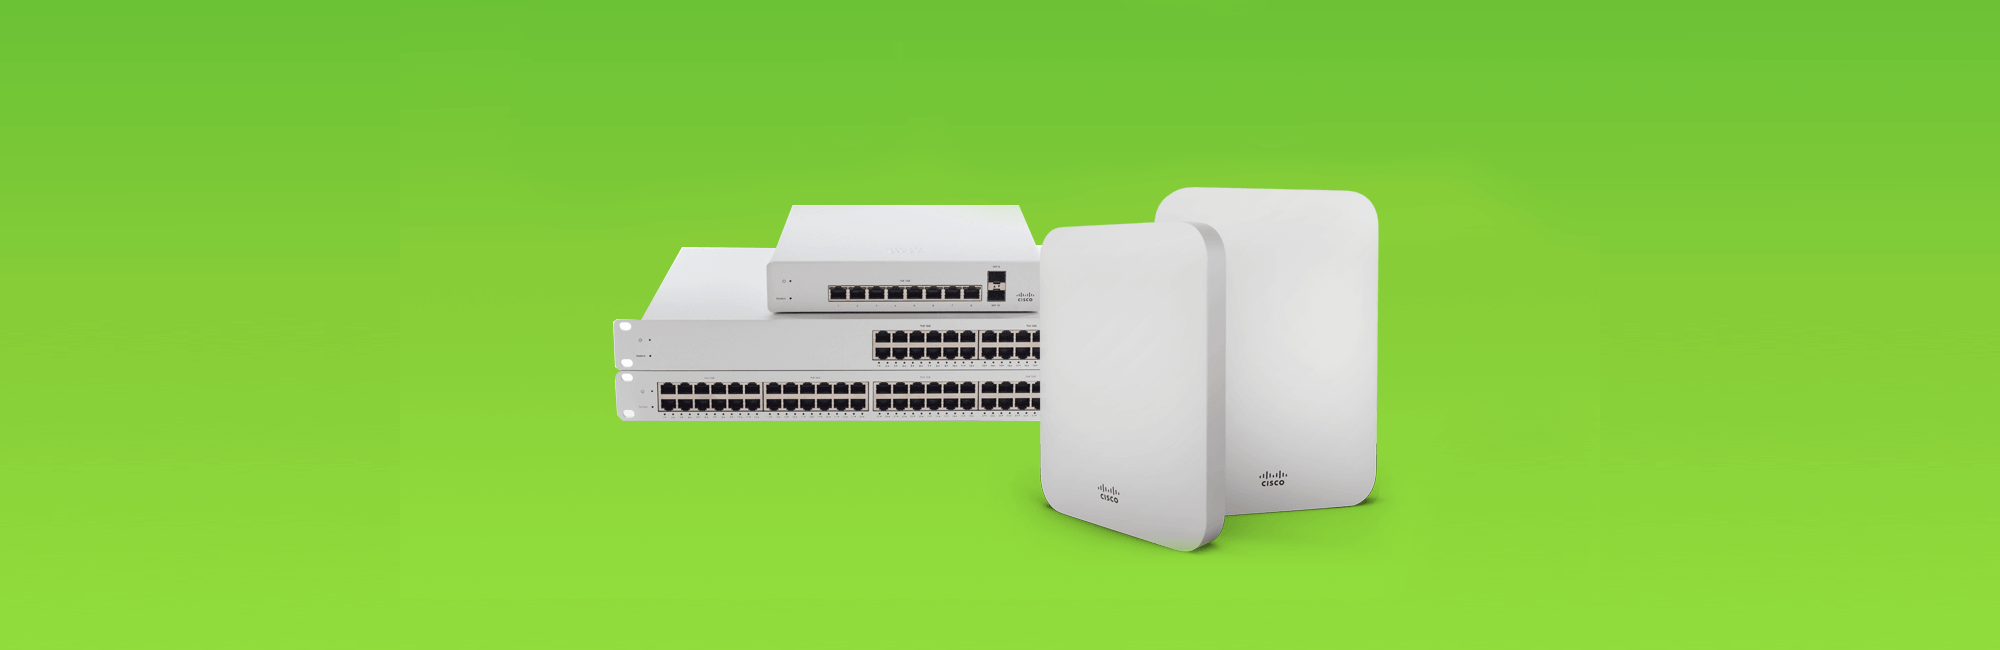 Network Switches that Make Life Easier